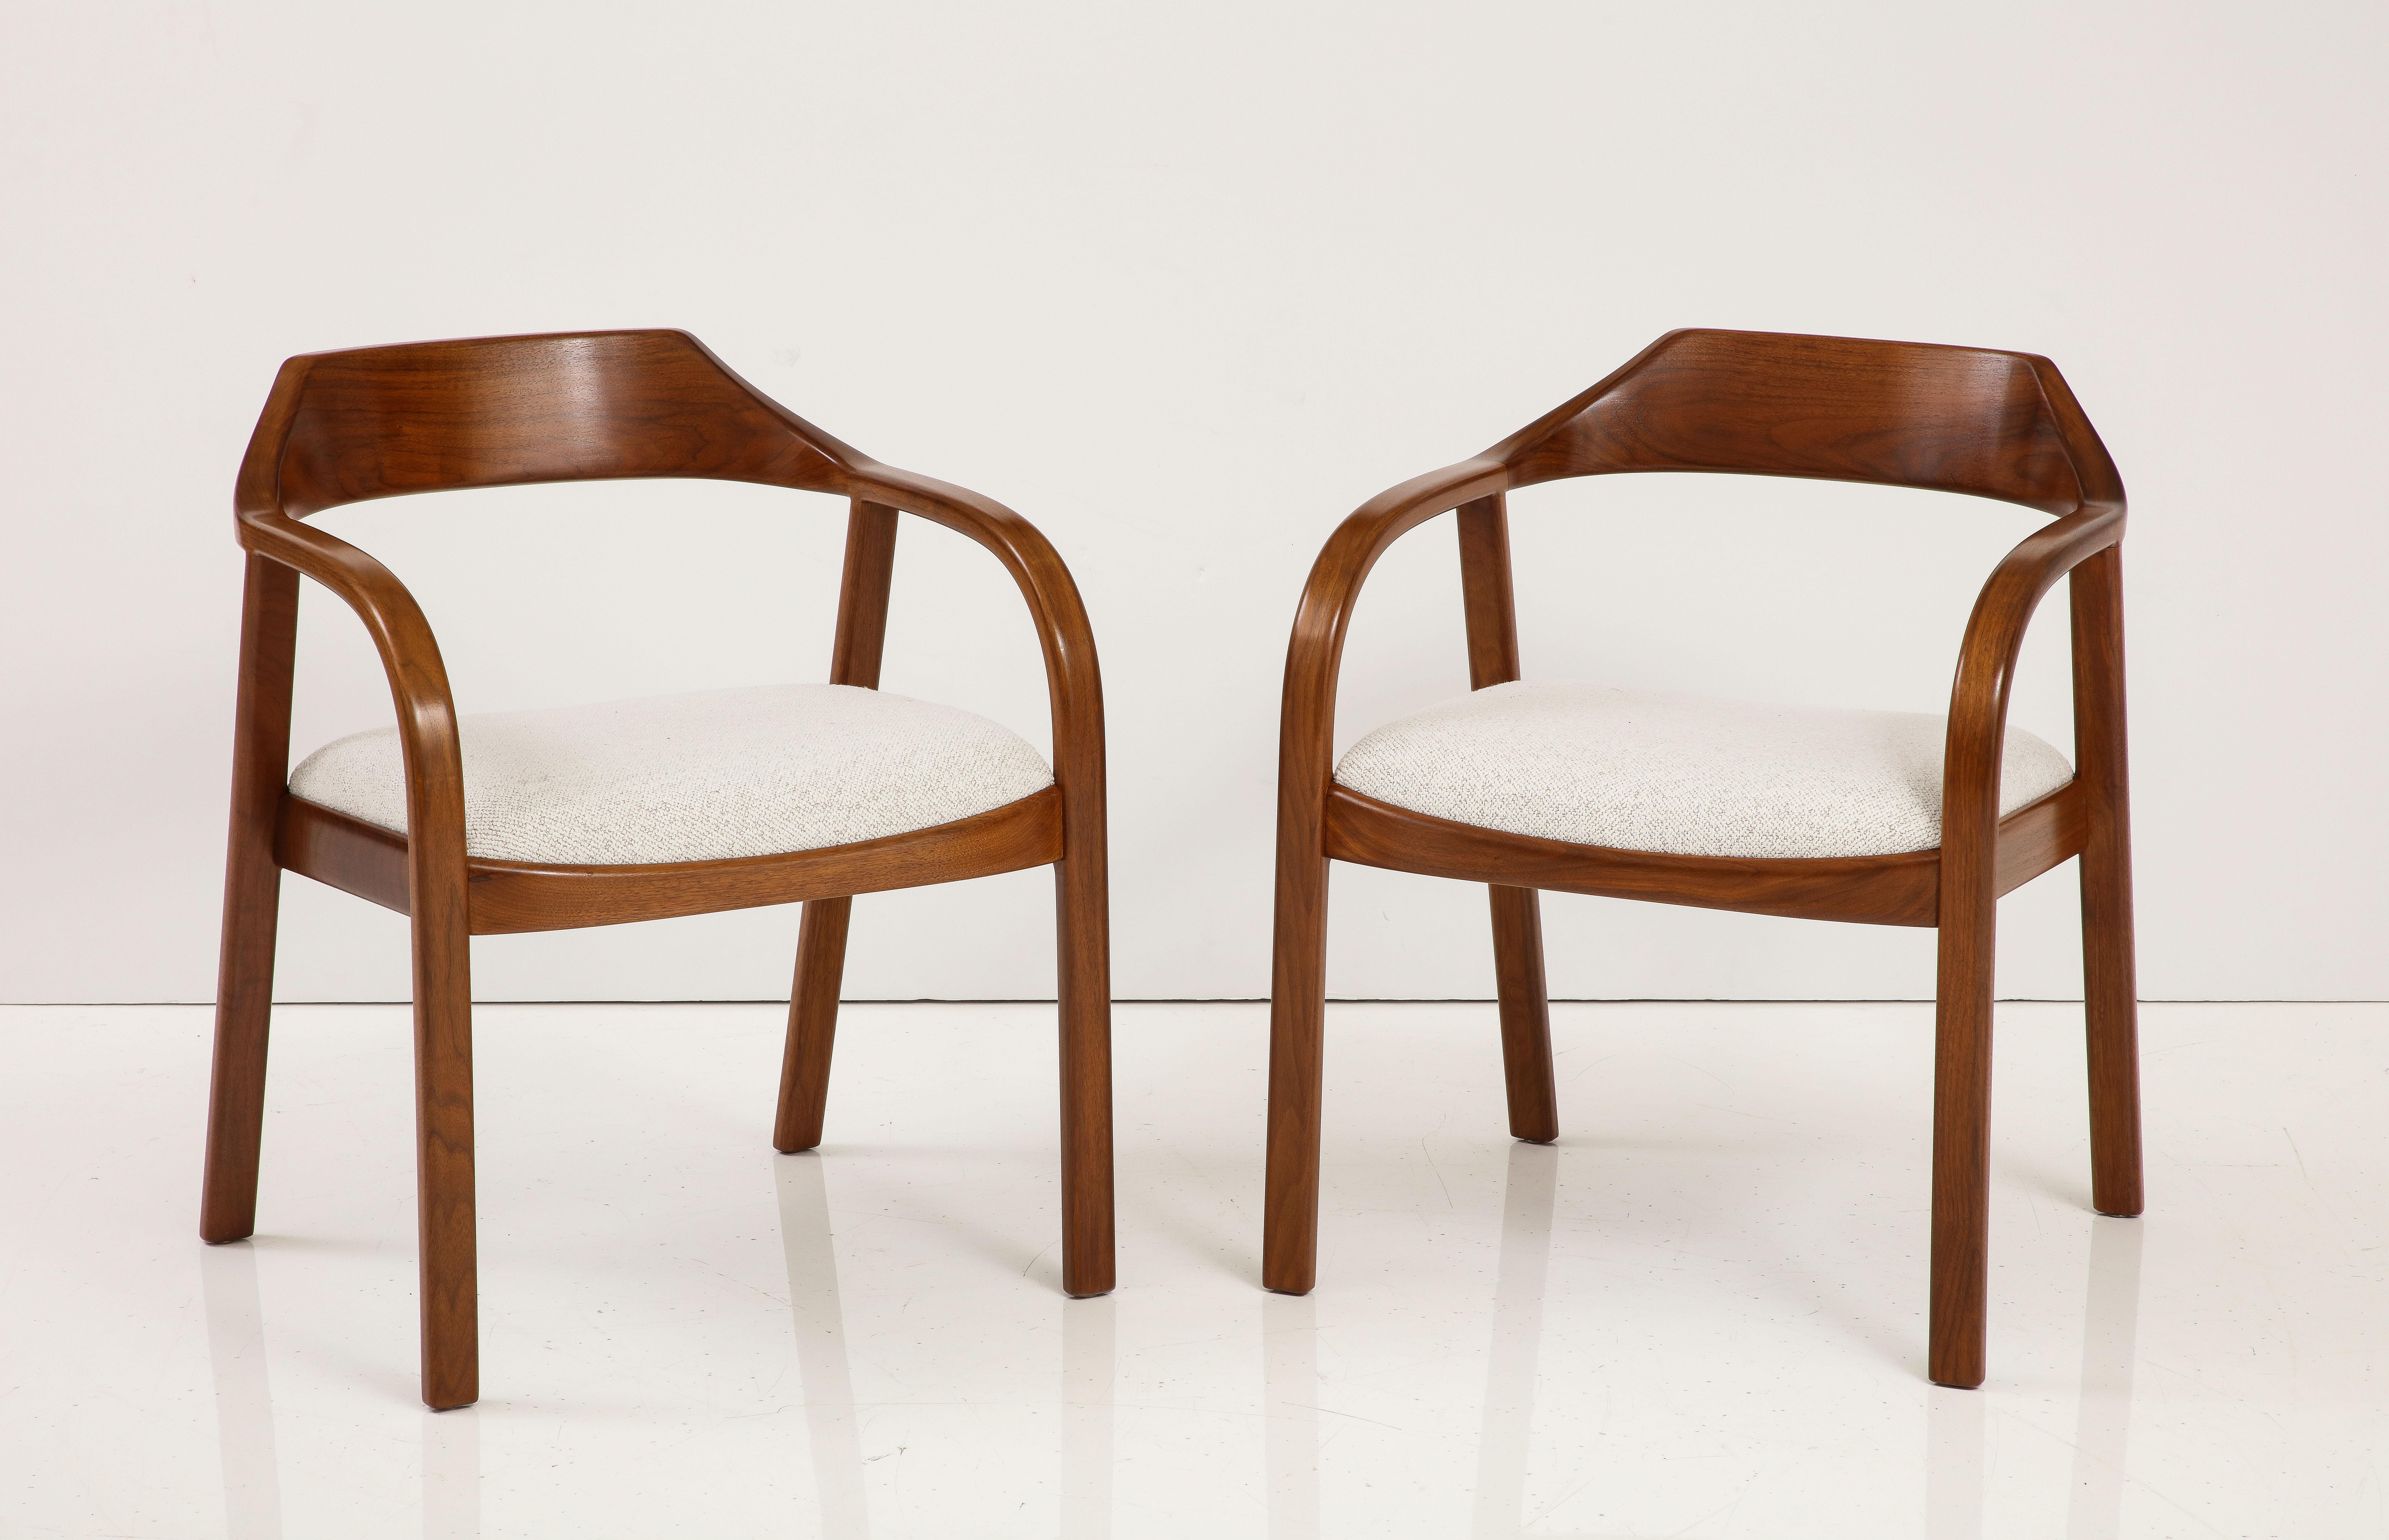 Amazing pair of 1970s sculptural walnut armchairs designed by Jens Risom, fully restored and re-upholstered, with minor wear and patina due to age and use.